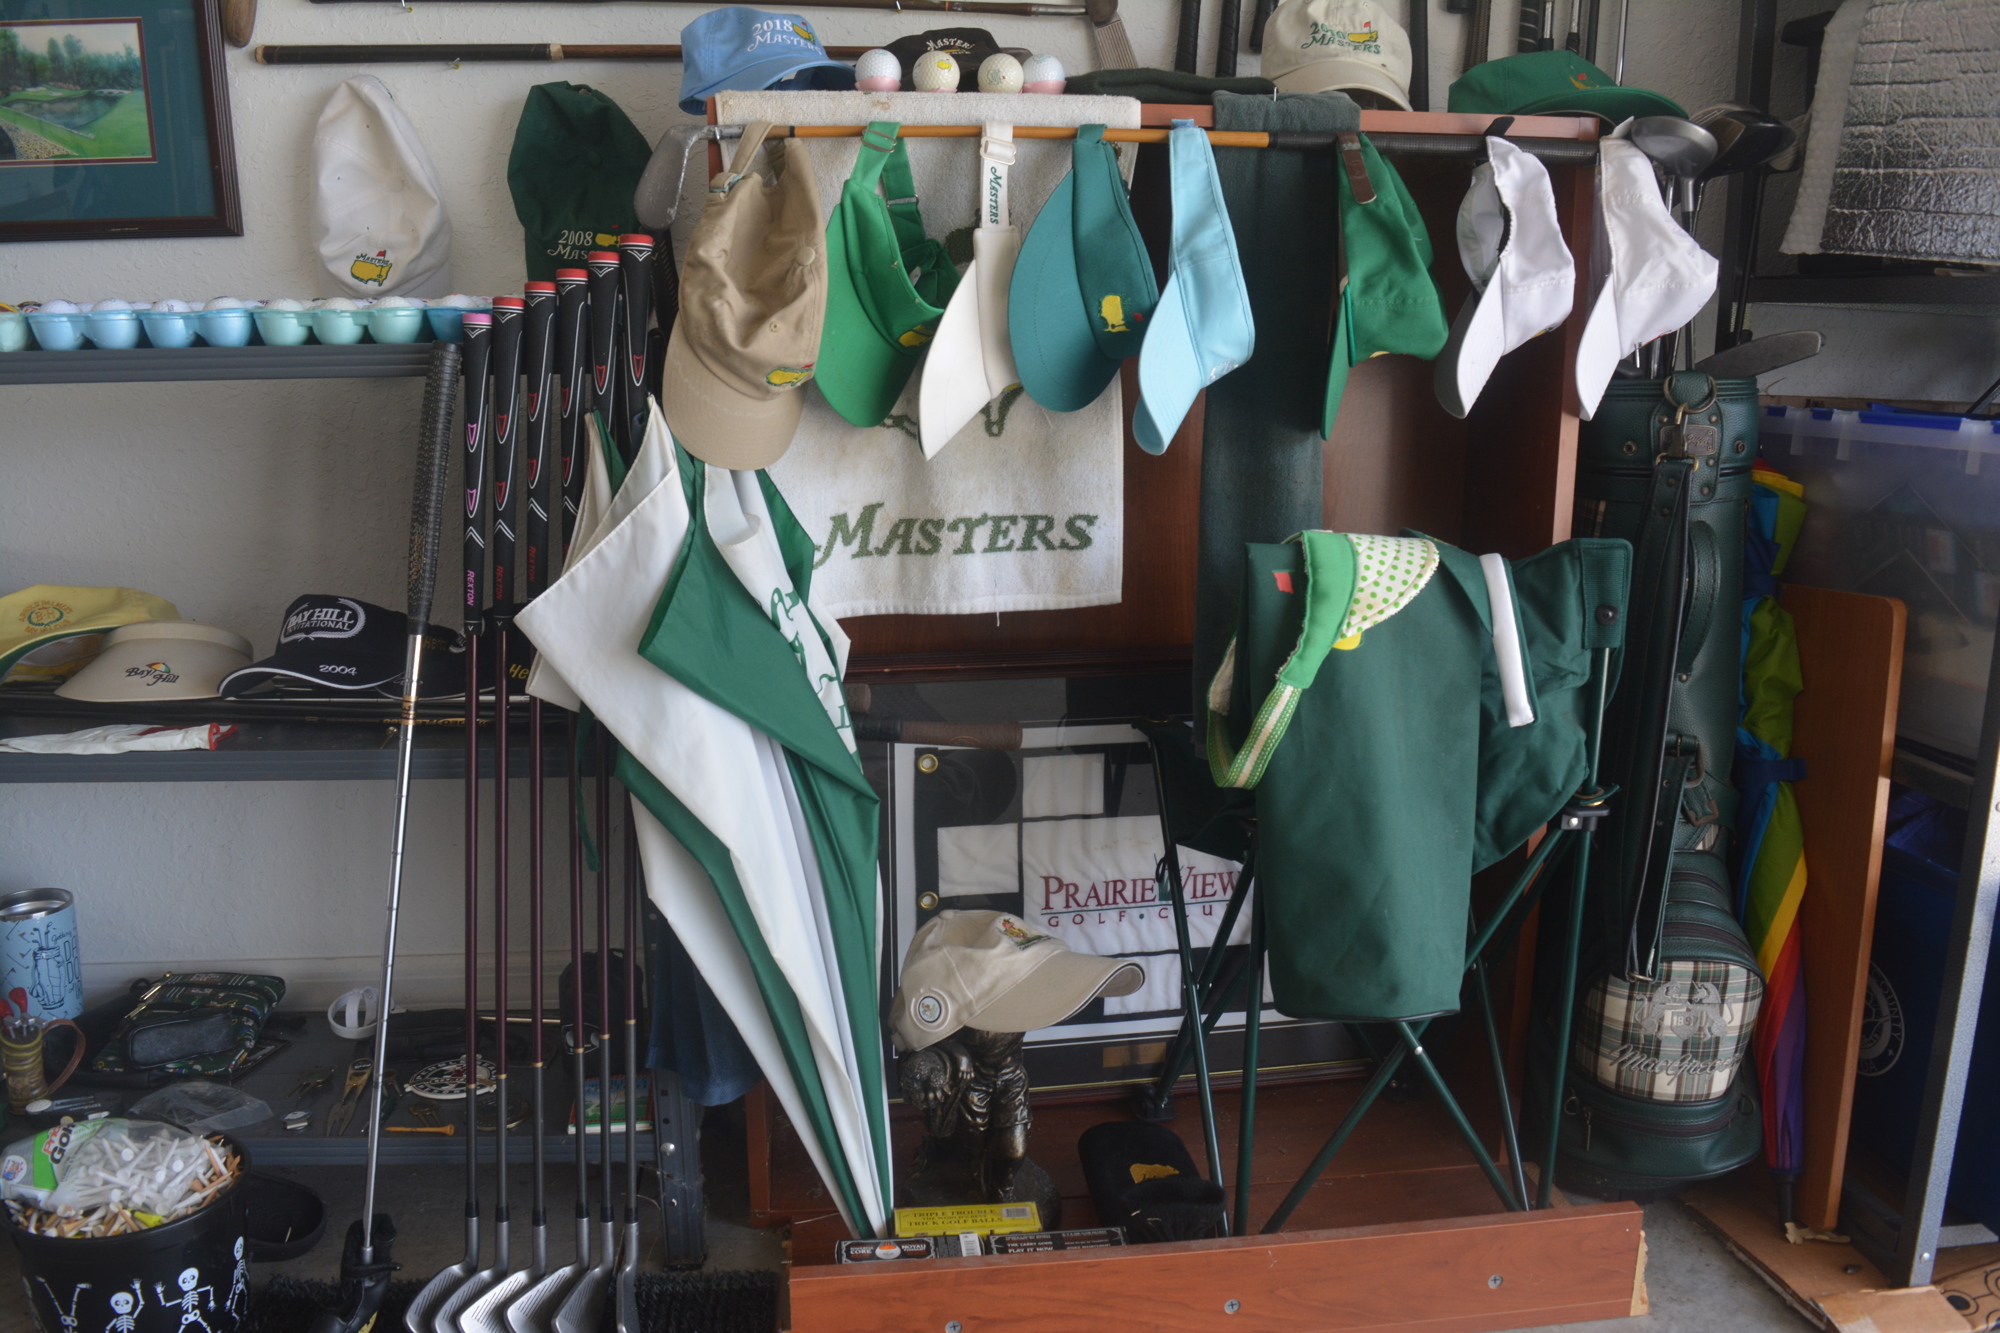 The Masters portion of Keith Heifner's golf collection contains hats, flags and other memorabilia. (Photo by Ryan Kohn)